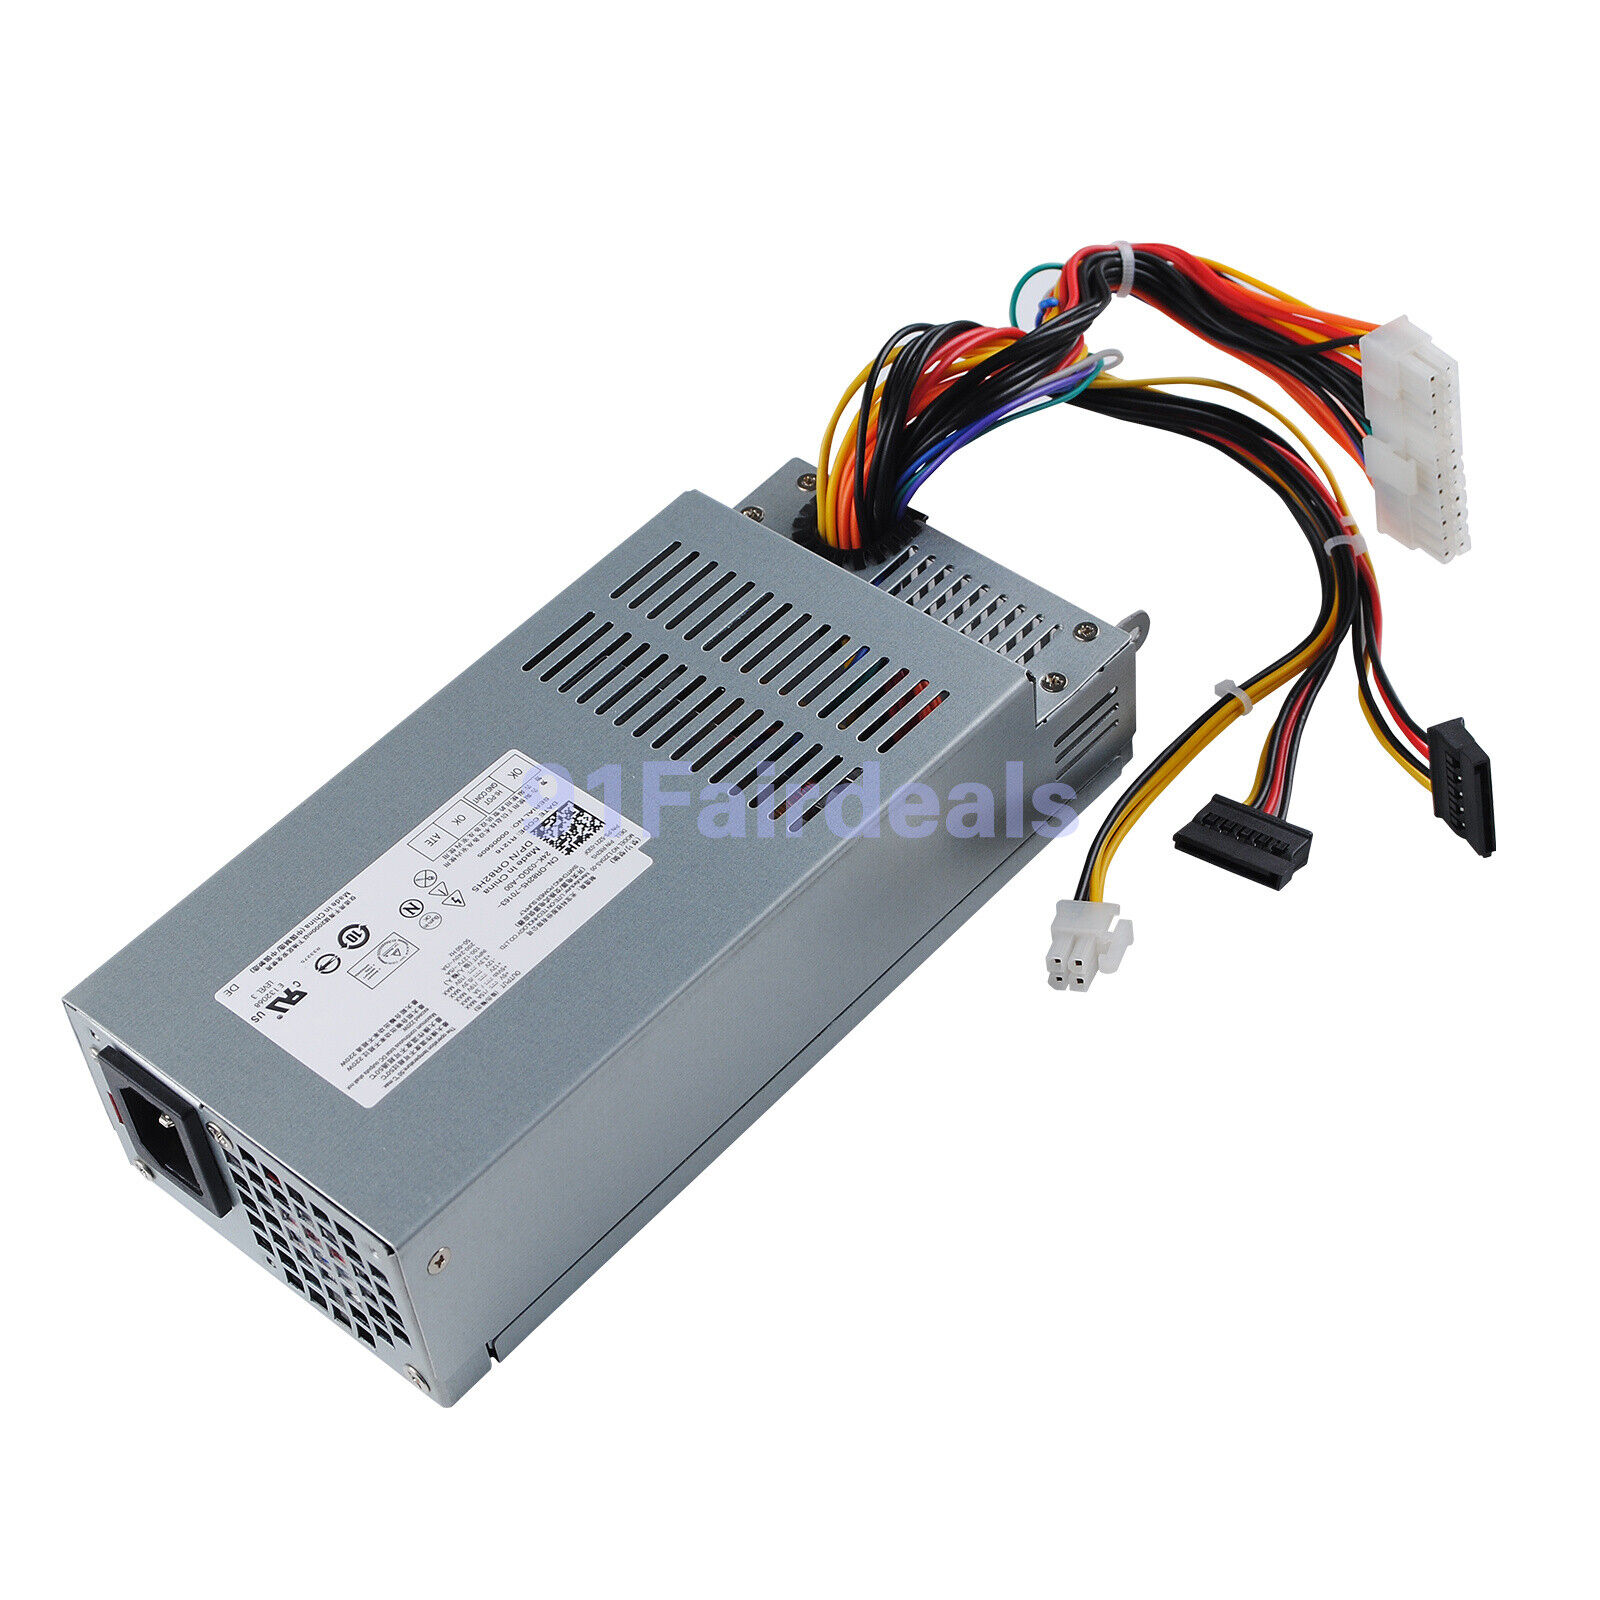 New Power Supply Dell Inspiron 3647 660S 220W 650WP 89XW5 R82H5 R5RV4 H220NS-00